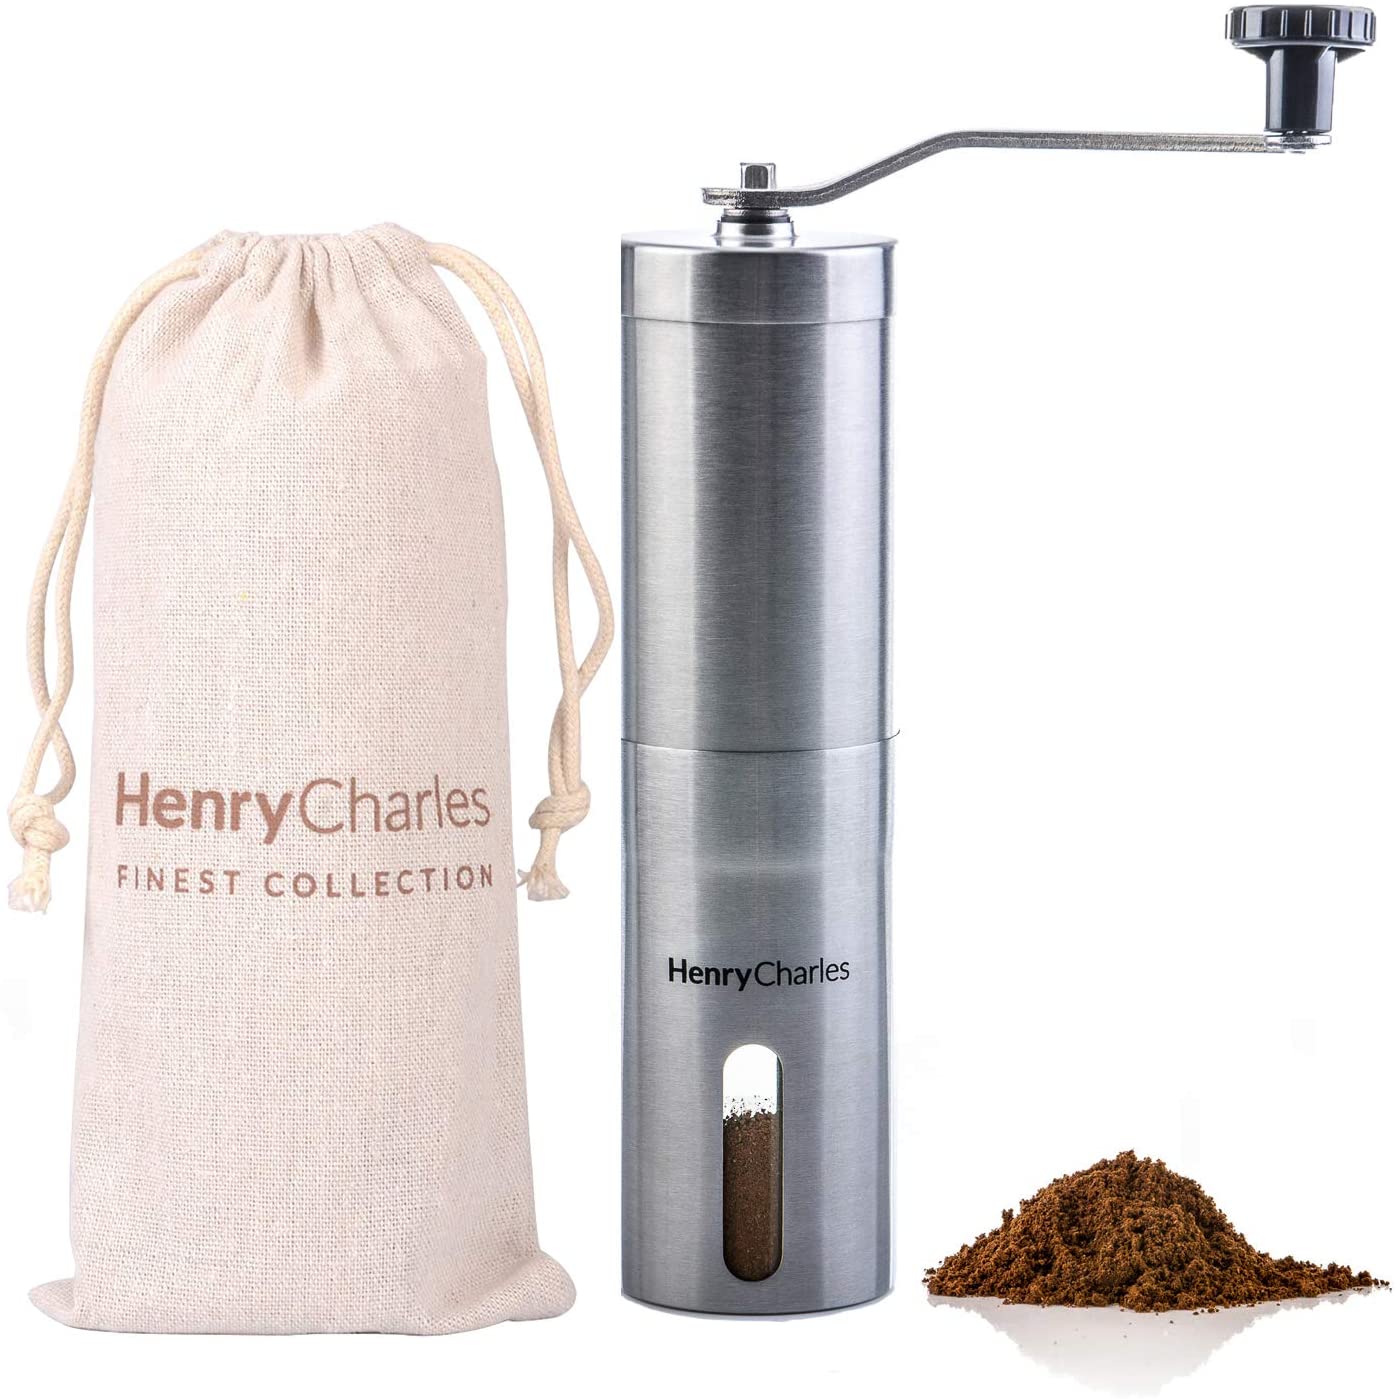 Henry Charles Manual Coffee Grinder Stainless Steel with Adjustable